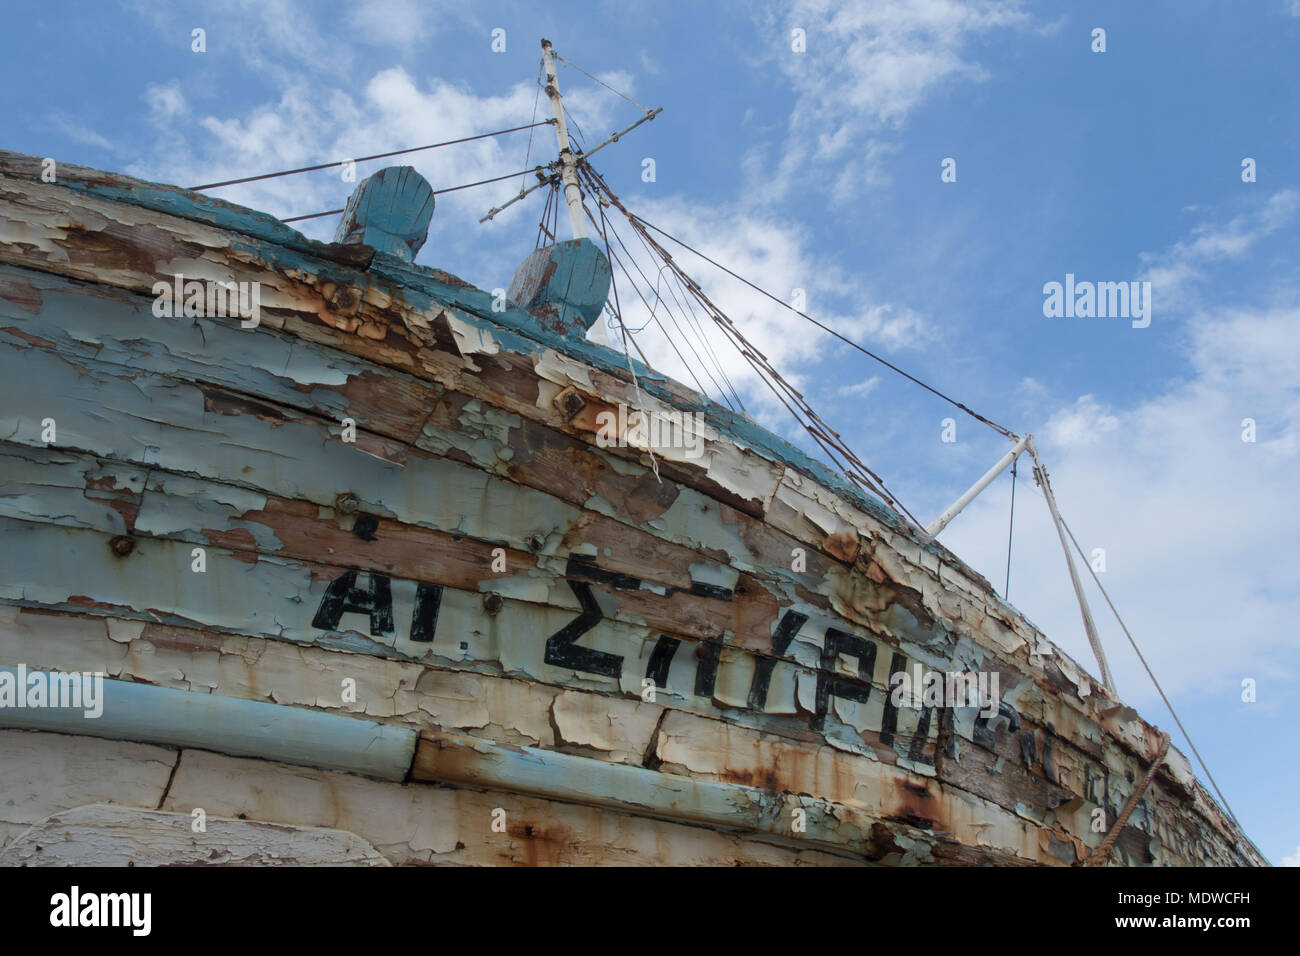 Close up of wooden boat in dry dock showing colourful peeling paint, Polis, Cyprus Stock Photo